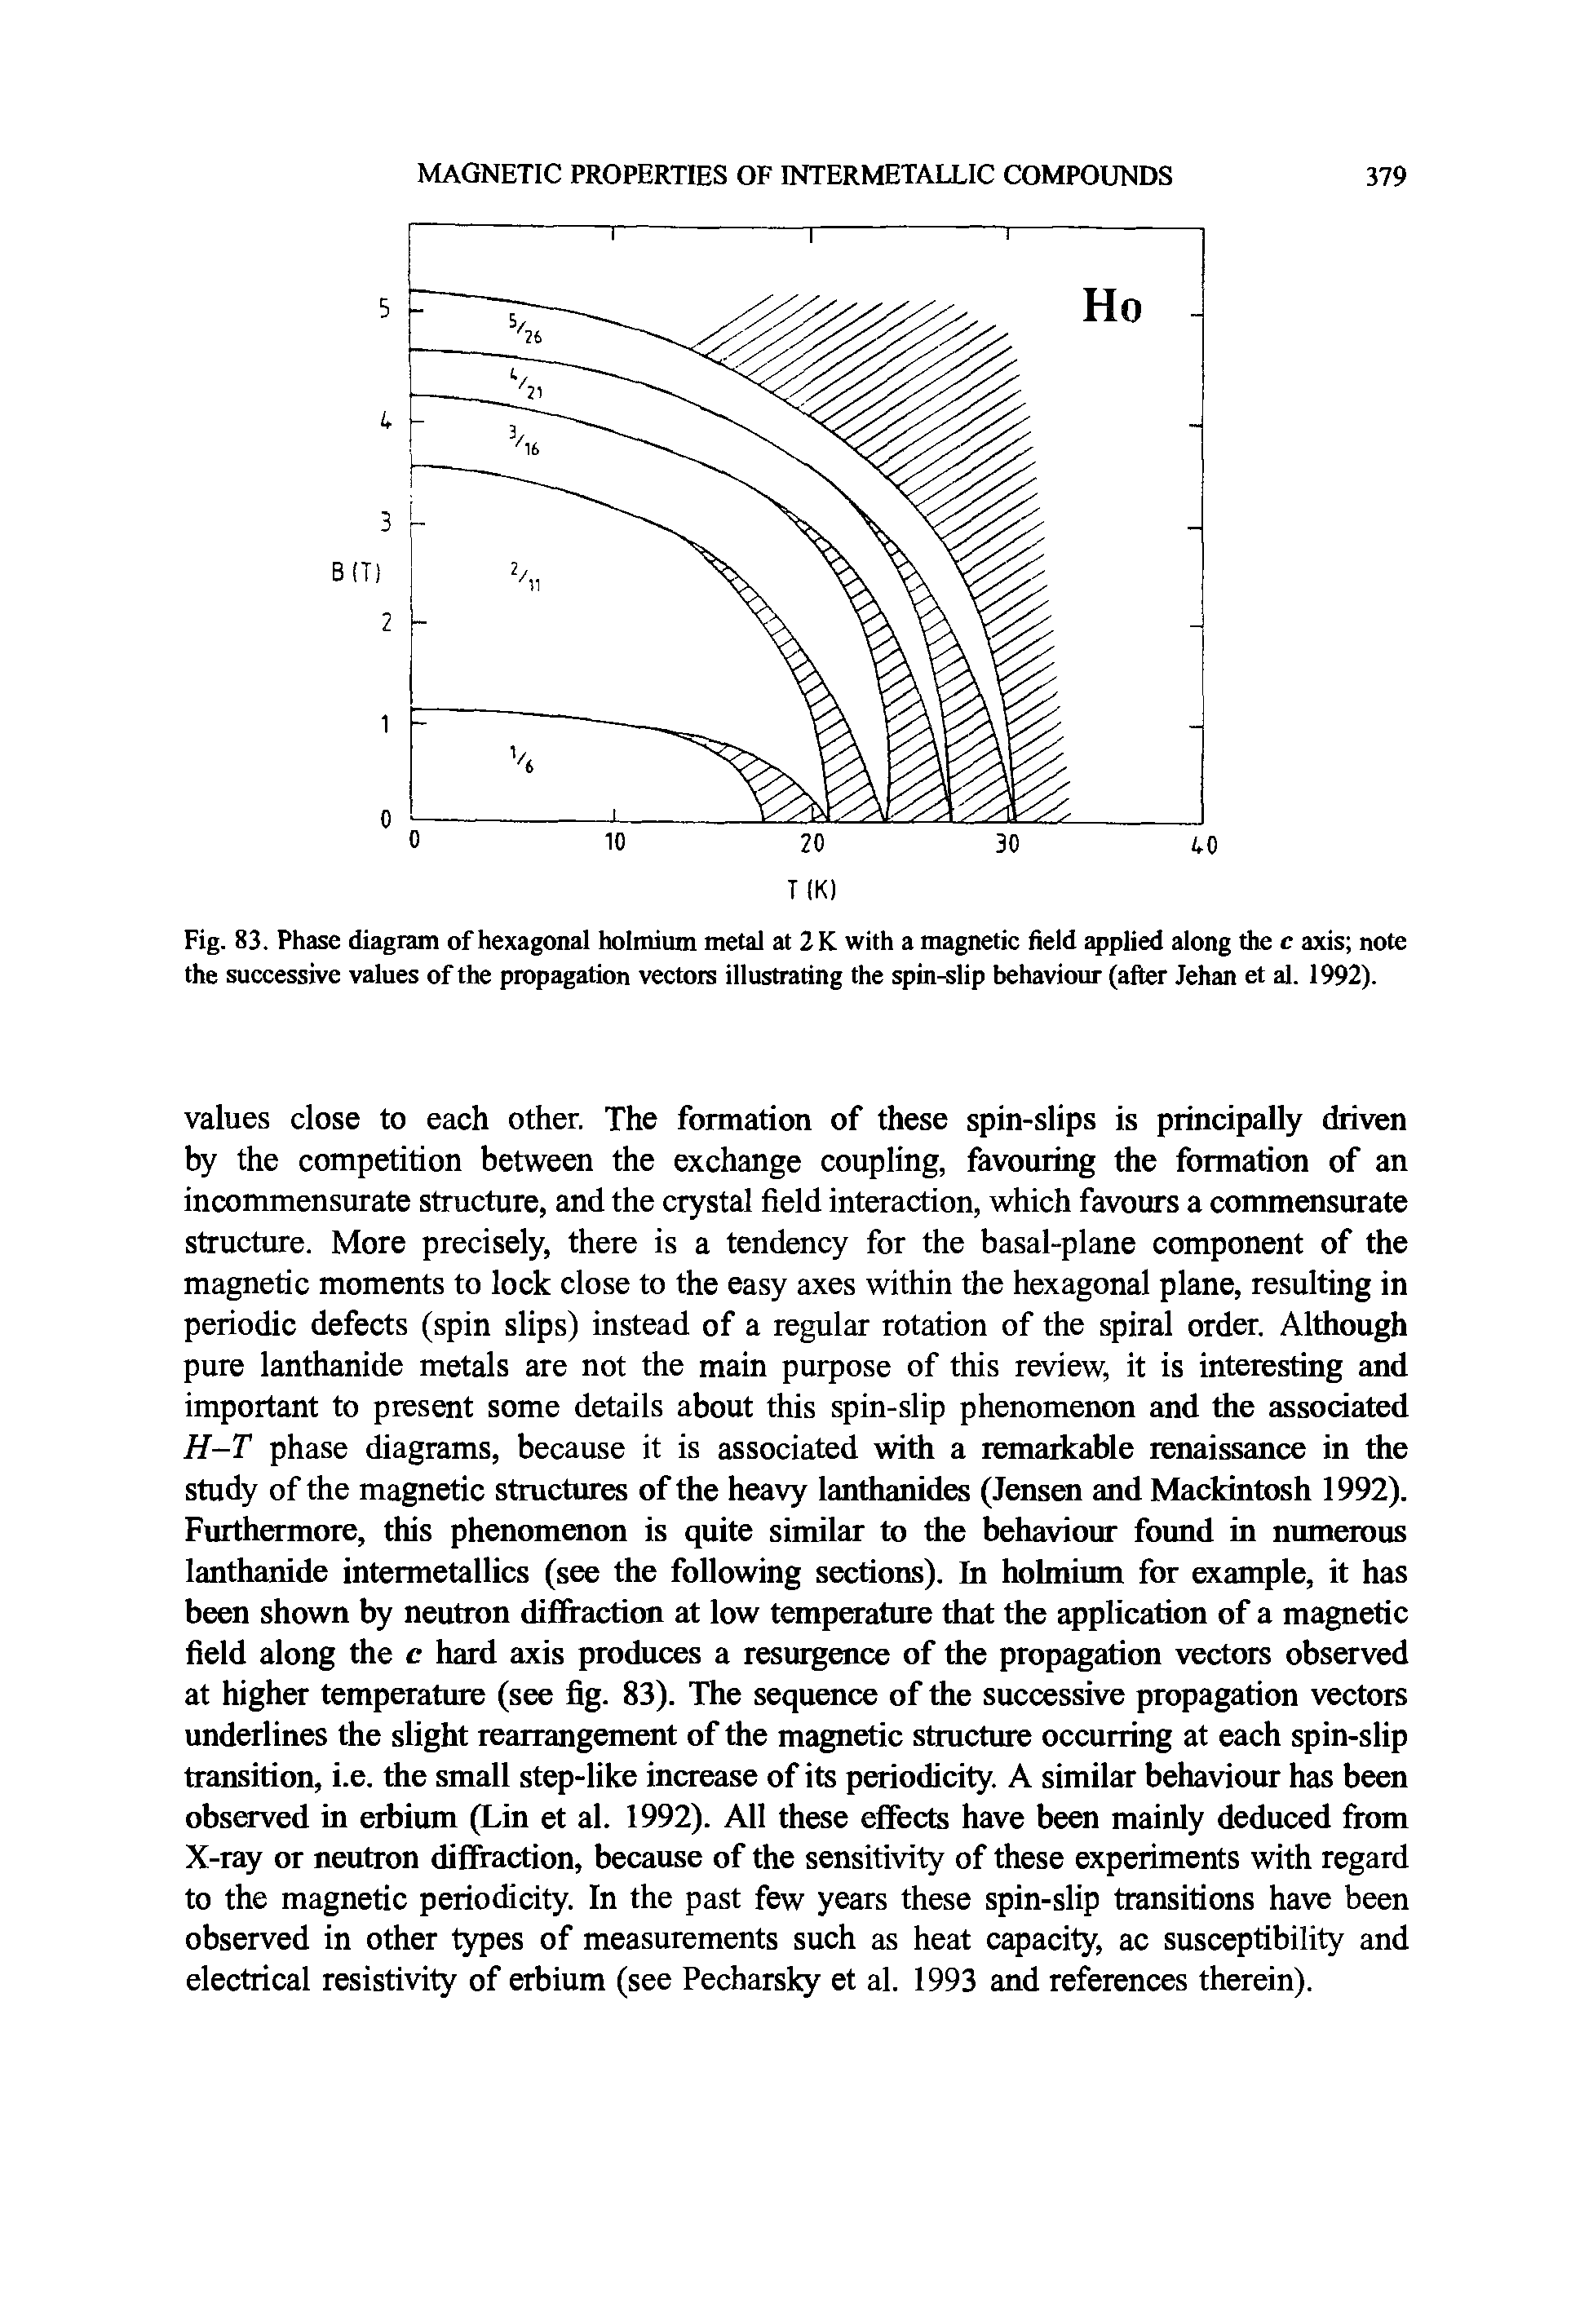 Fig. 83. Phase diagram of hexagonal holmium metal at 2 K with a magnetic field applied along the c axis note the successive values of the propagation vectors illustrating the spin-slip behaviour (after Jehan et al. 1992).